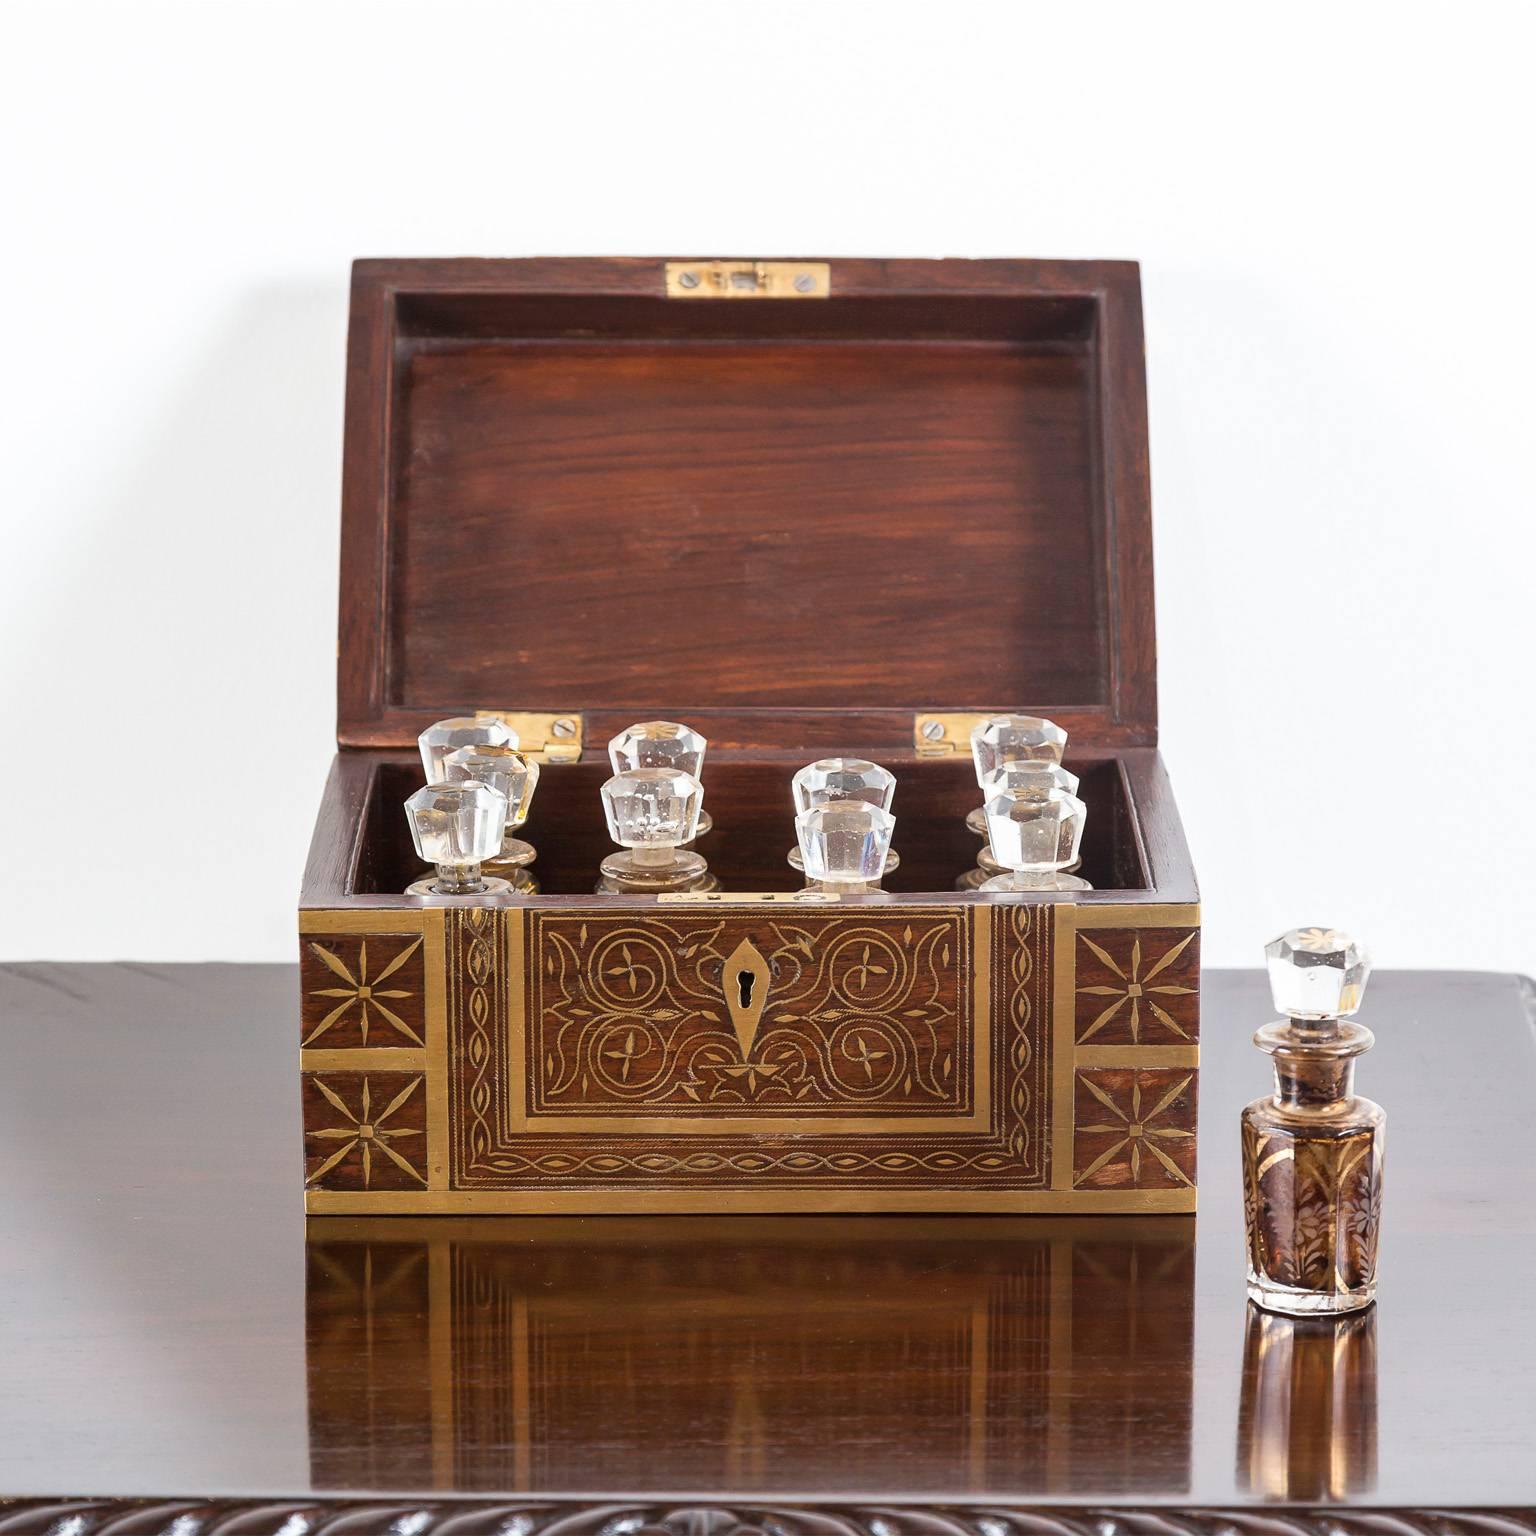 A beautiful British Colonial rosewood perfume box, profusely inlaid with delicately shaped pieces of brass design. Brass strapping to the edges, brass escutcheon plate and brass recessed lift handles on the sides.
The box opens to reveal a